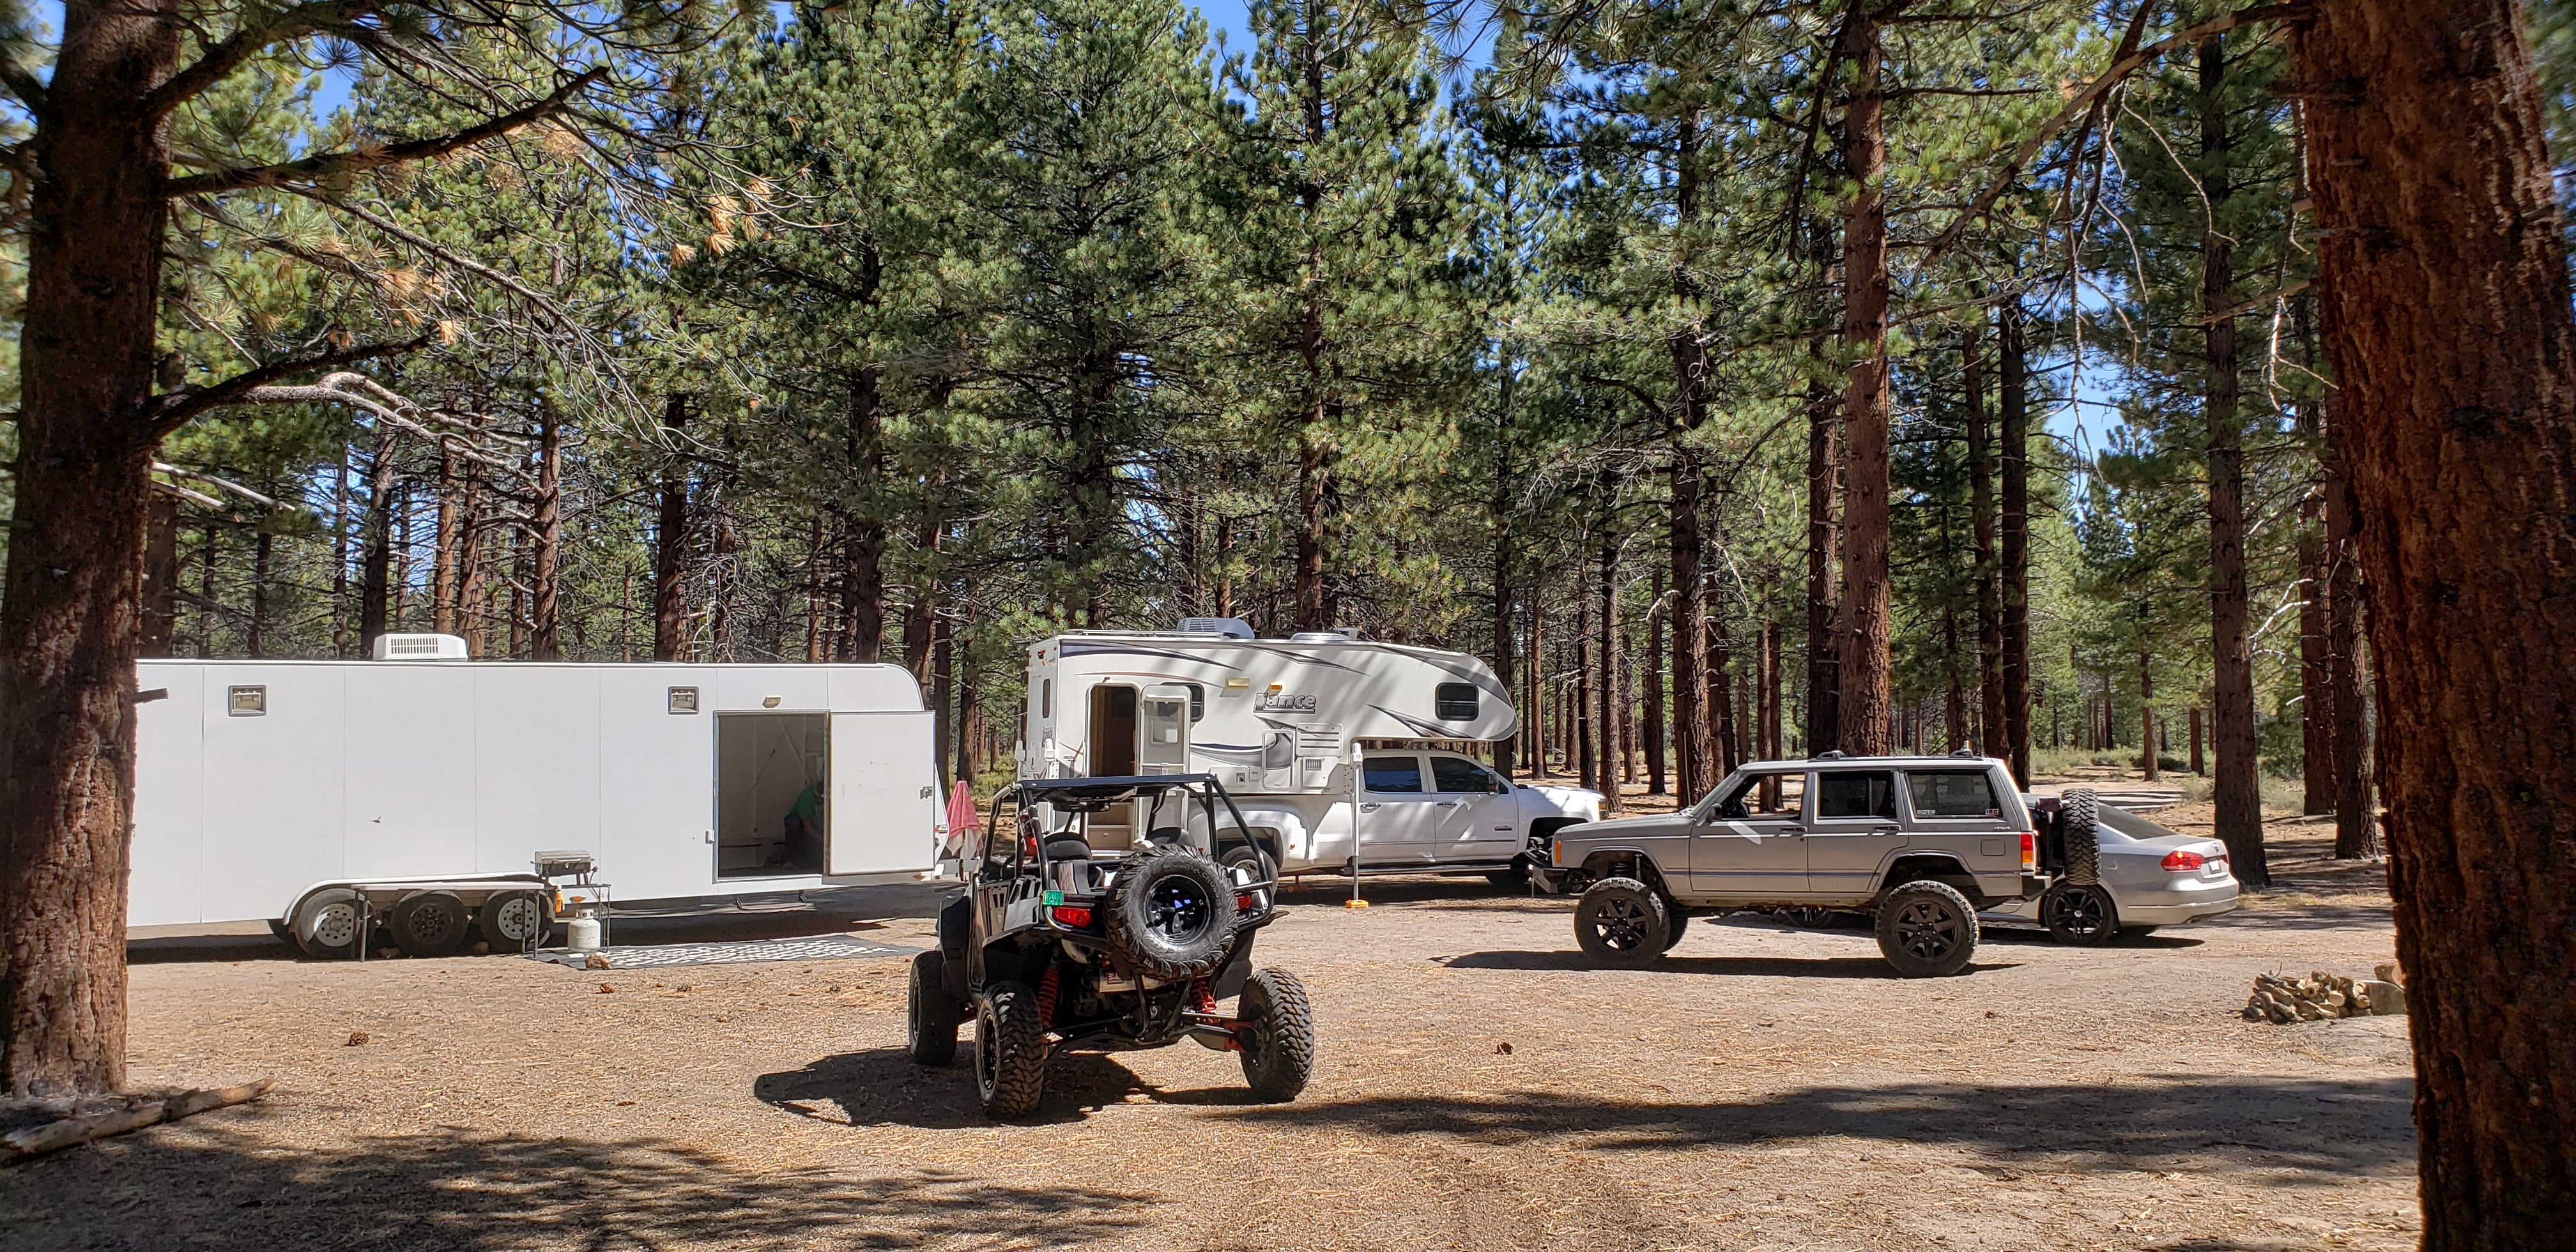 Our campsite in Inyo National Forest, dispersed camping.